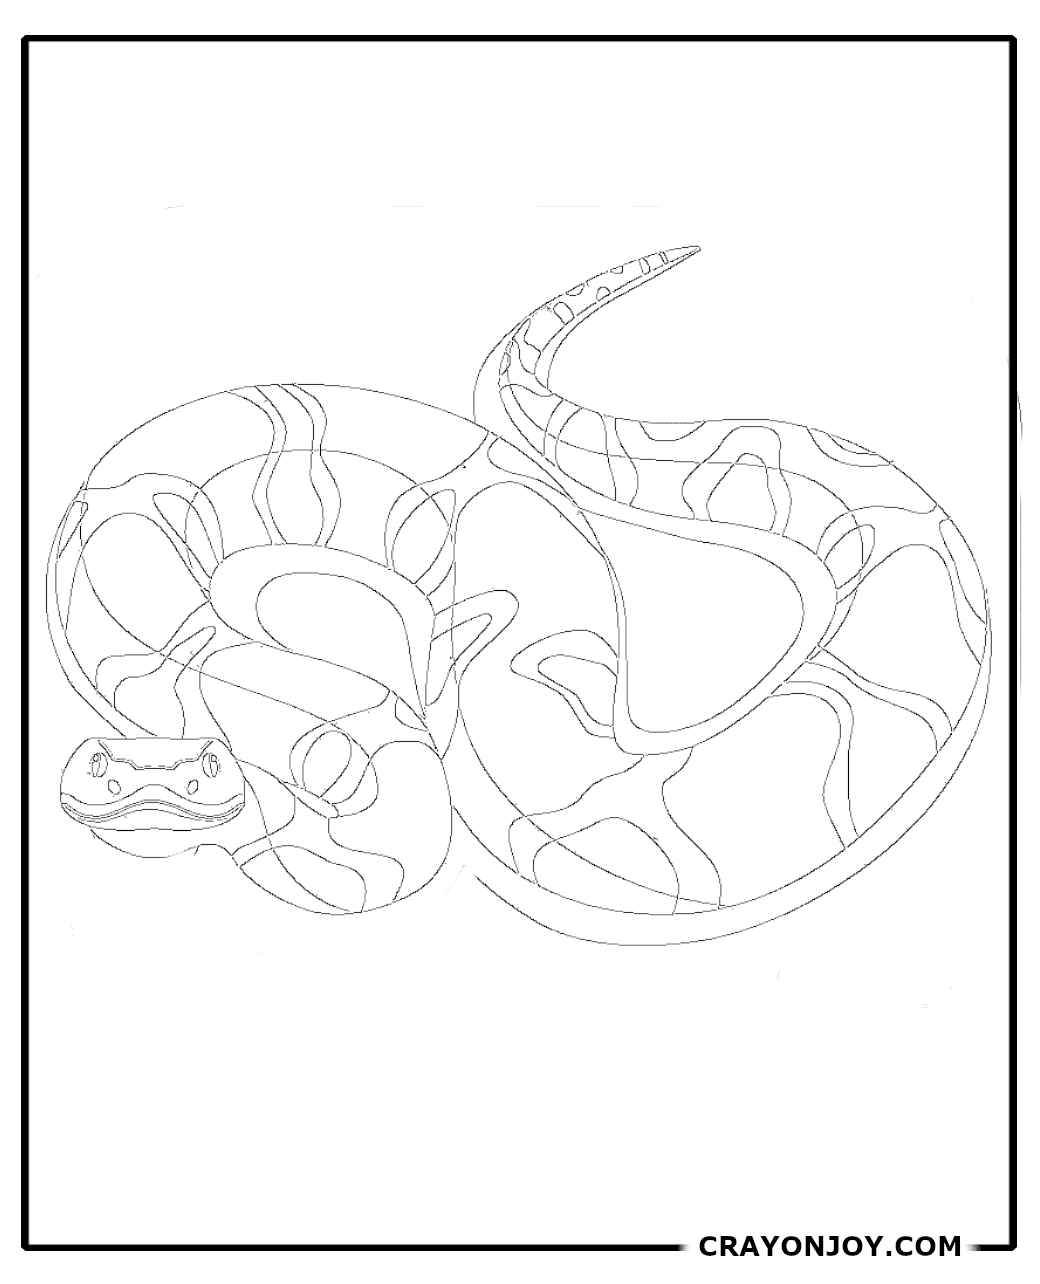 Viper Snake Coloring Pages: Free Printable Sheets for Kids and Adults